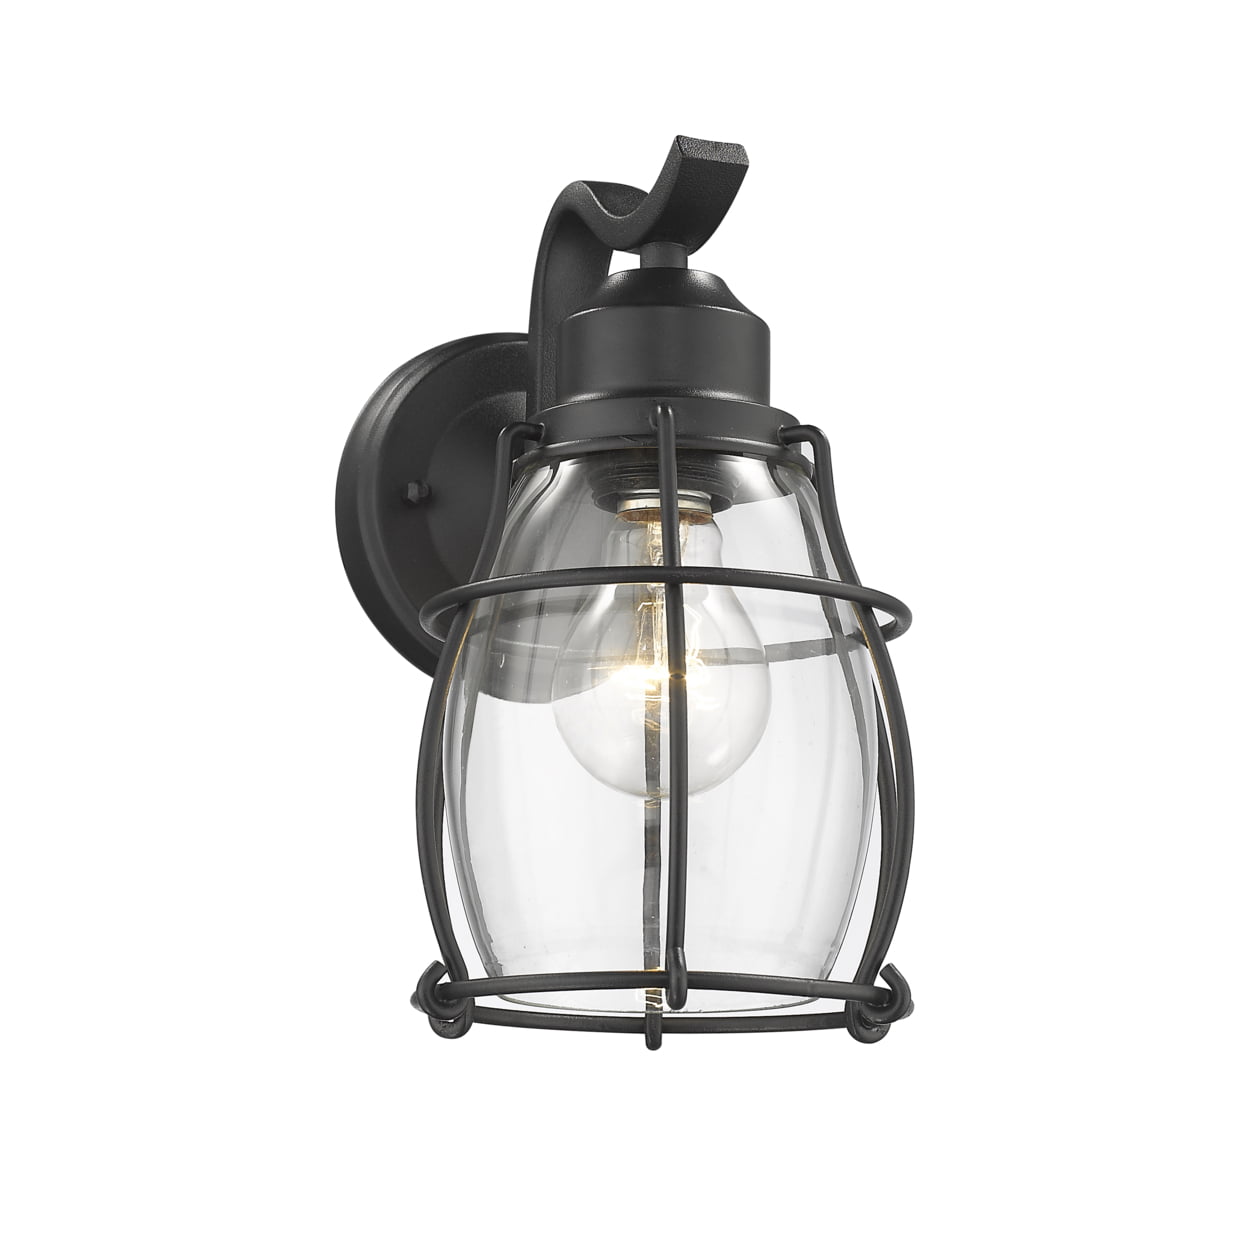 Ch2d291bk10-od1 Charlotte Industrial 1 Light Textured Black Outdoor Wall Sconce - 10 In.